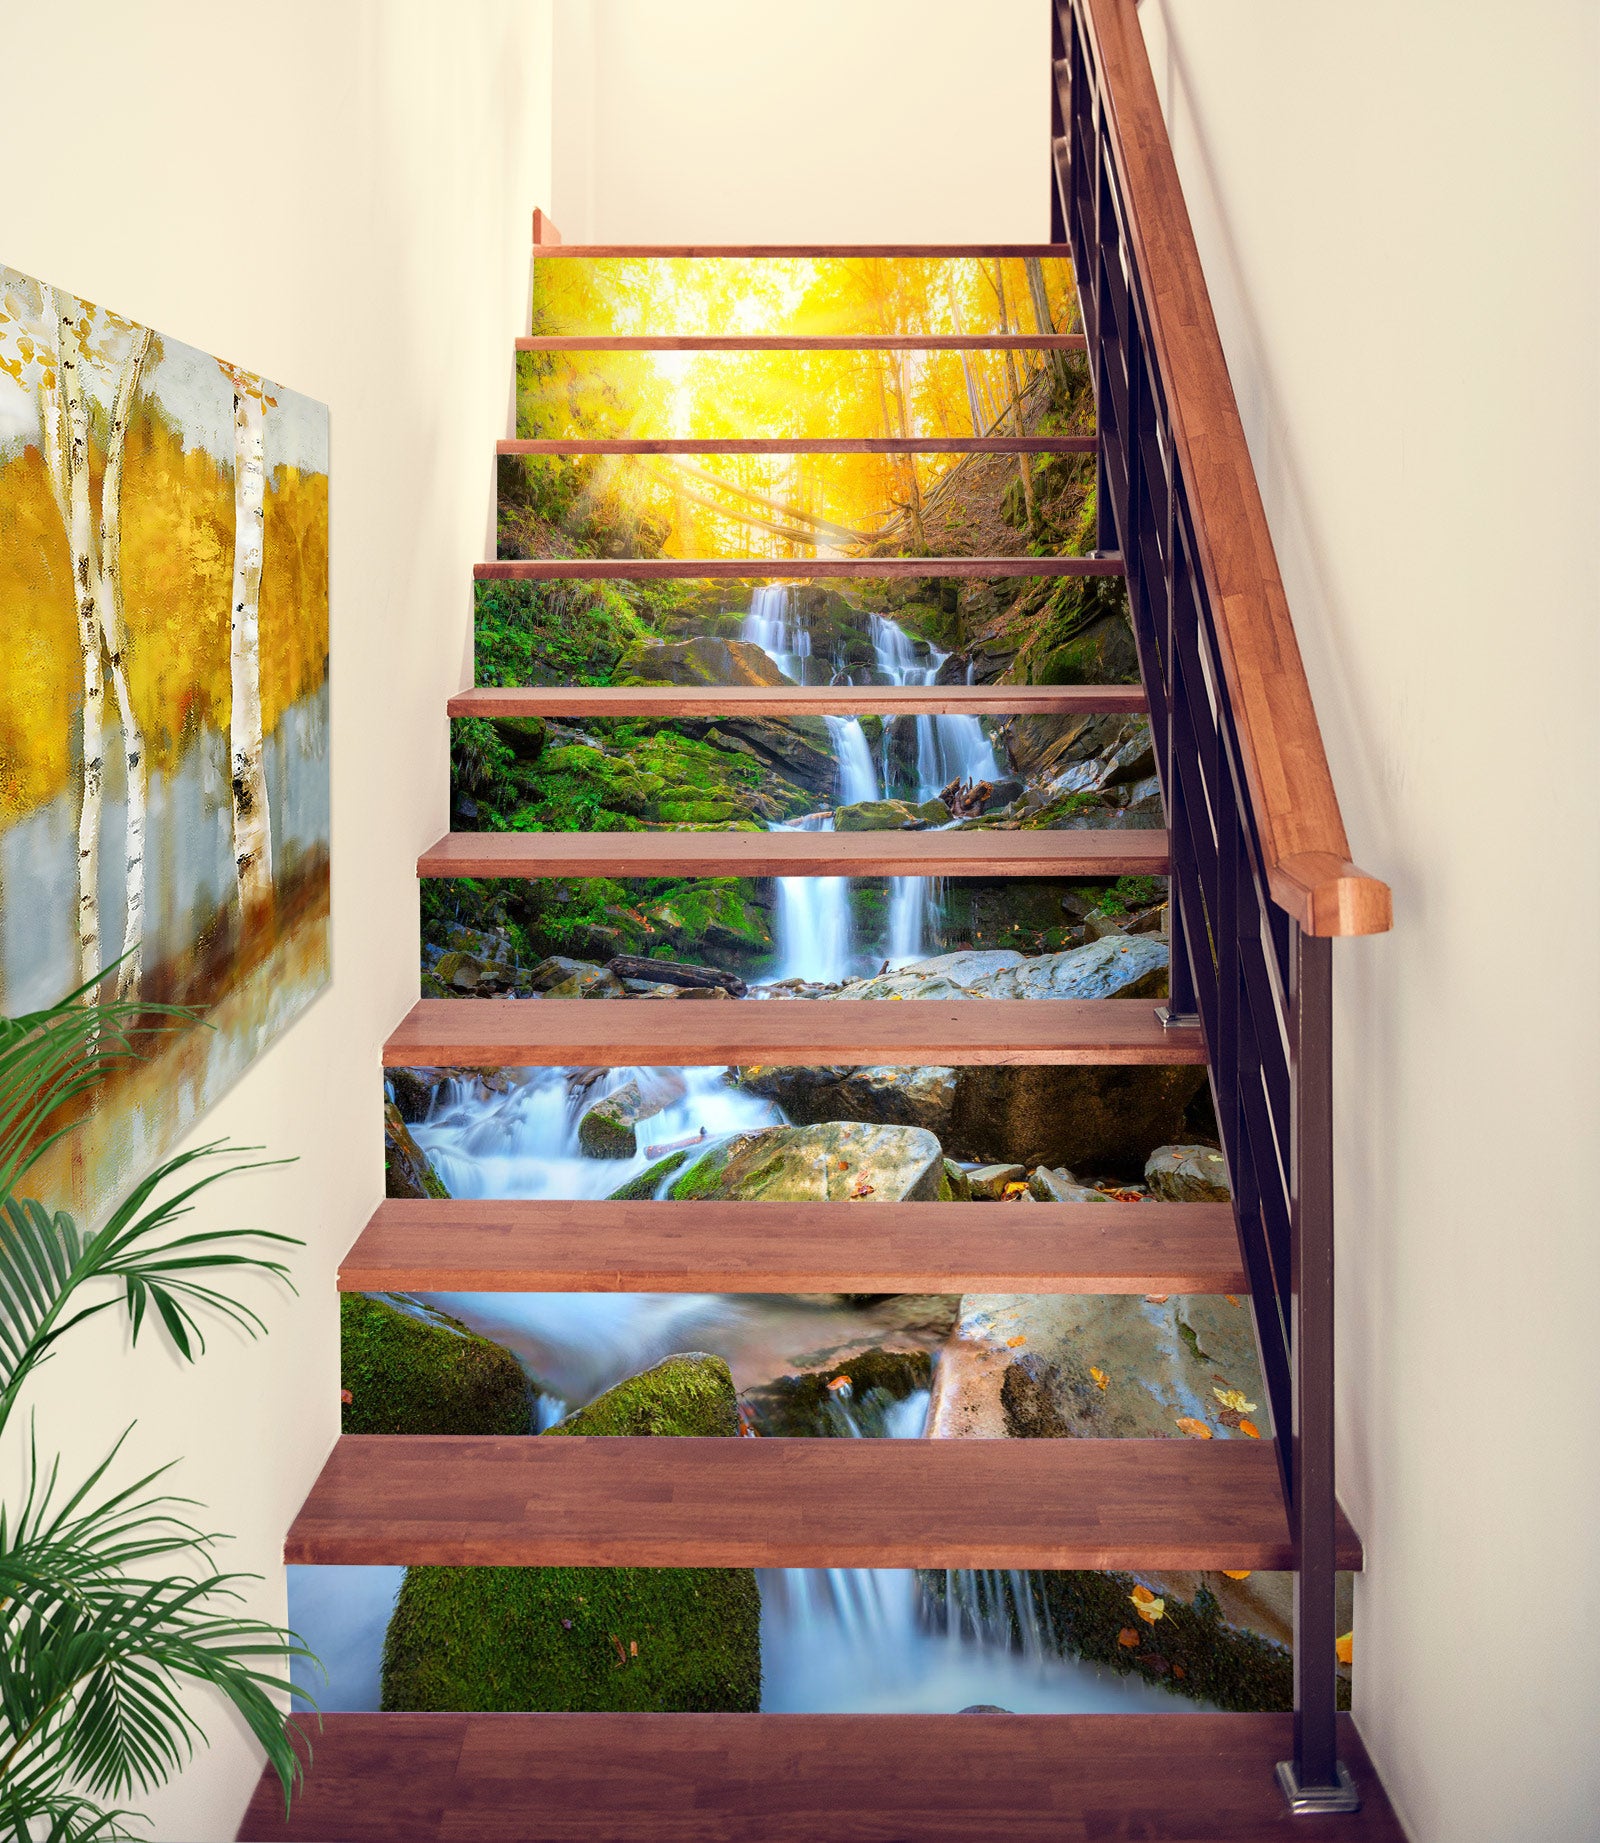 3D Winding Water In Daylight 371 Stair Risers